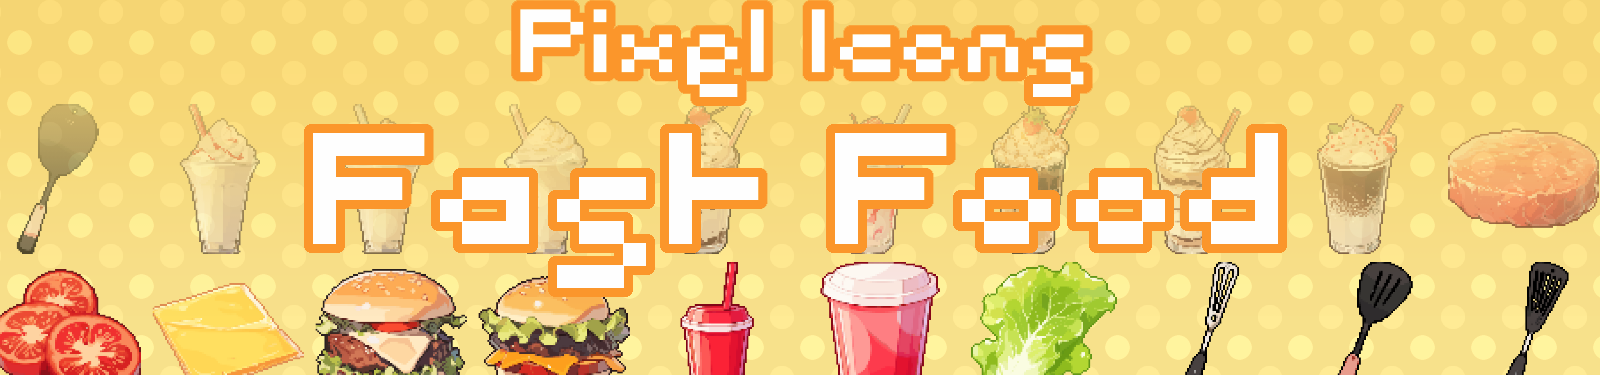 Pixel Icons: Fast Food